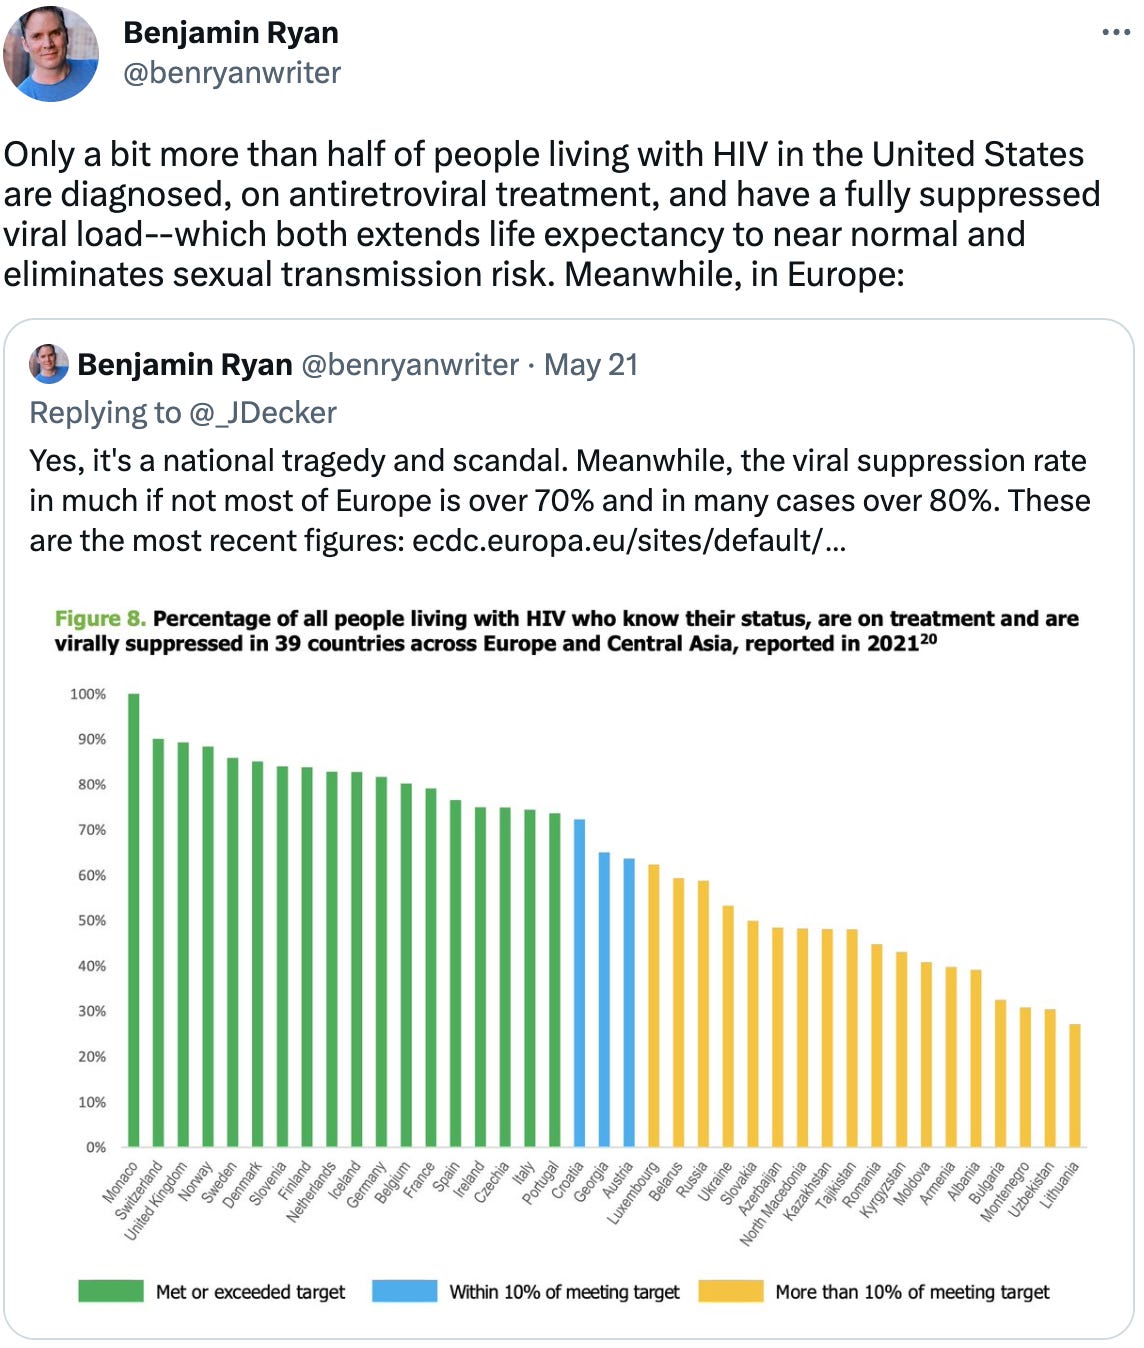  See new Tweets Conversation Benjamin Ryan @benryanwriter Only a bit more than half of people living with HIV in the United States are diagnosed, on antiretroviral treatment, and have a fully suppressed viral load--which both extends life expectancy to near normal and eliminates sexual transmission risk. Meanwhile, in Europe: Quote Tweet Benjamin Ryan @benryanwriter · May 21 Replying to @_JDecker Yes, it's a national tragedy and scandal. Meanwhile, the viral suppression rate in much if not most of Europe is over 70% and in many cases over 80%. These are the most recent figures: https://ecdc.europa.eu/sites/default/files/documents/Dublin-Continuum-of-HIV-care-2021-progress-report-final-with-covers-updated.pdf